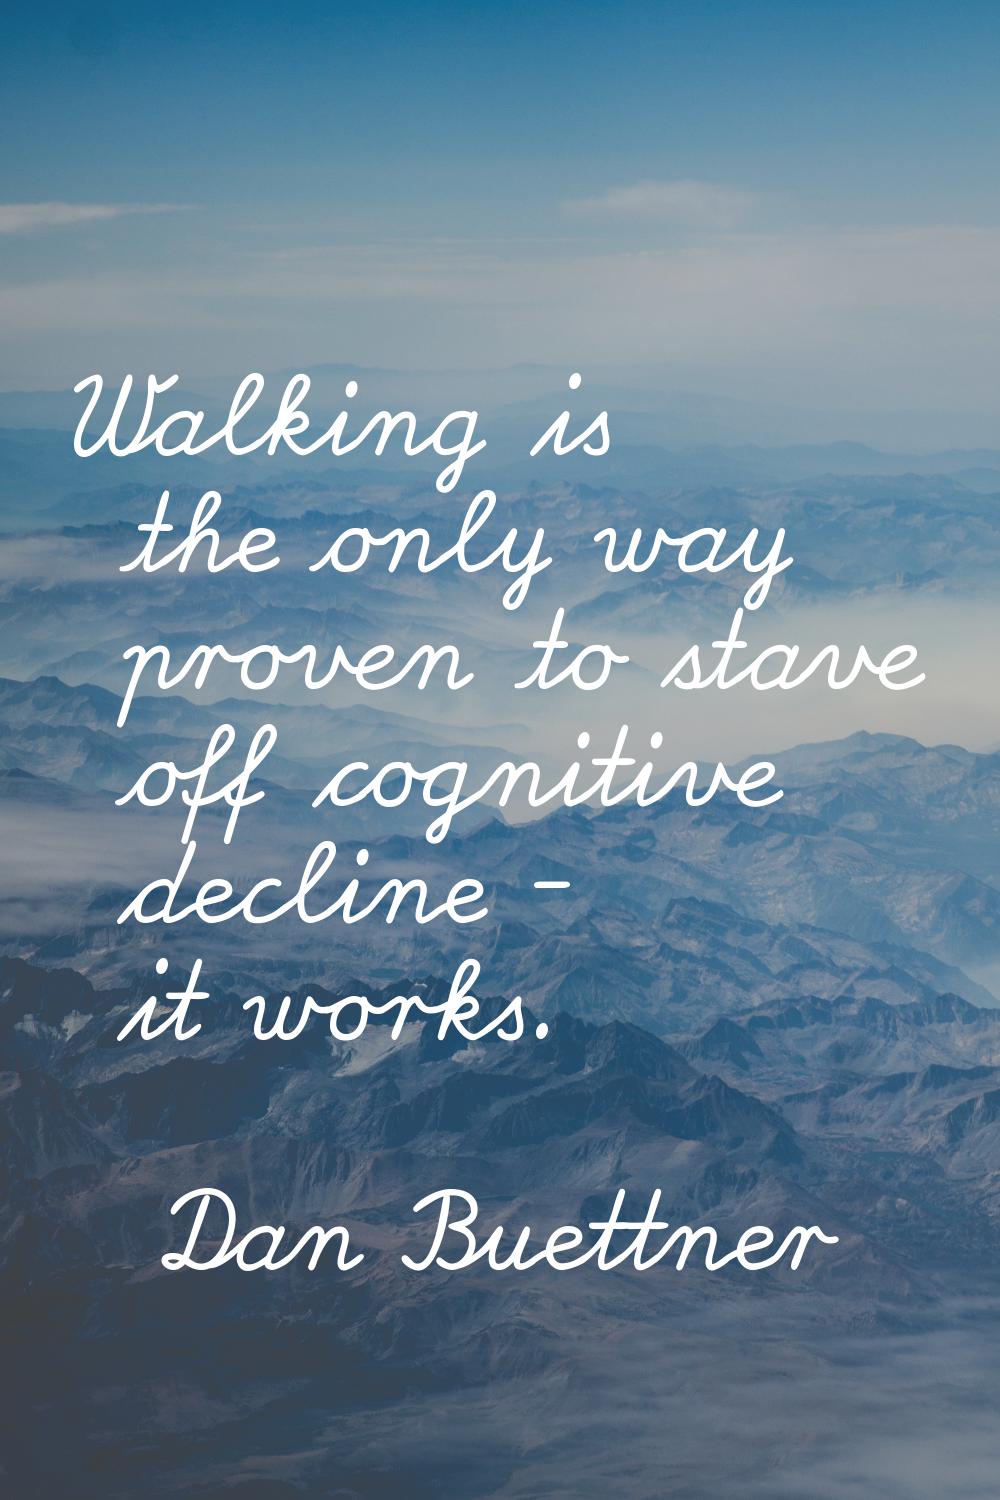 Walking is the only way proven to stave off cognitive decline - it works.